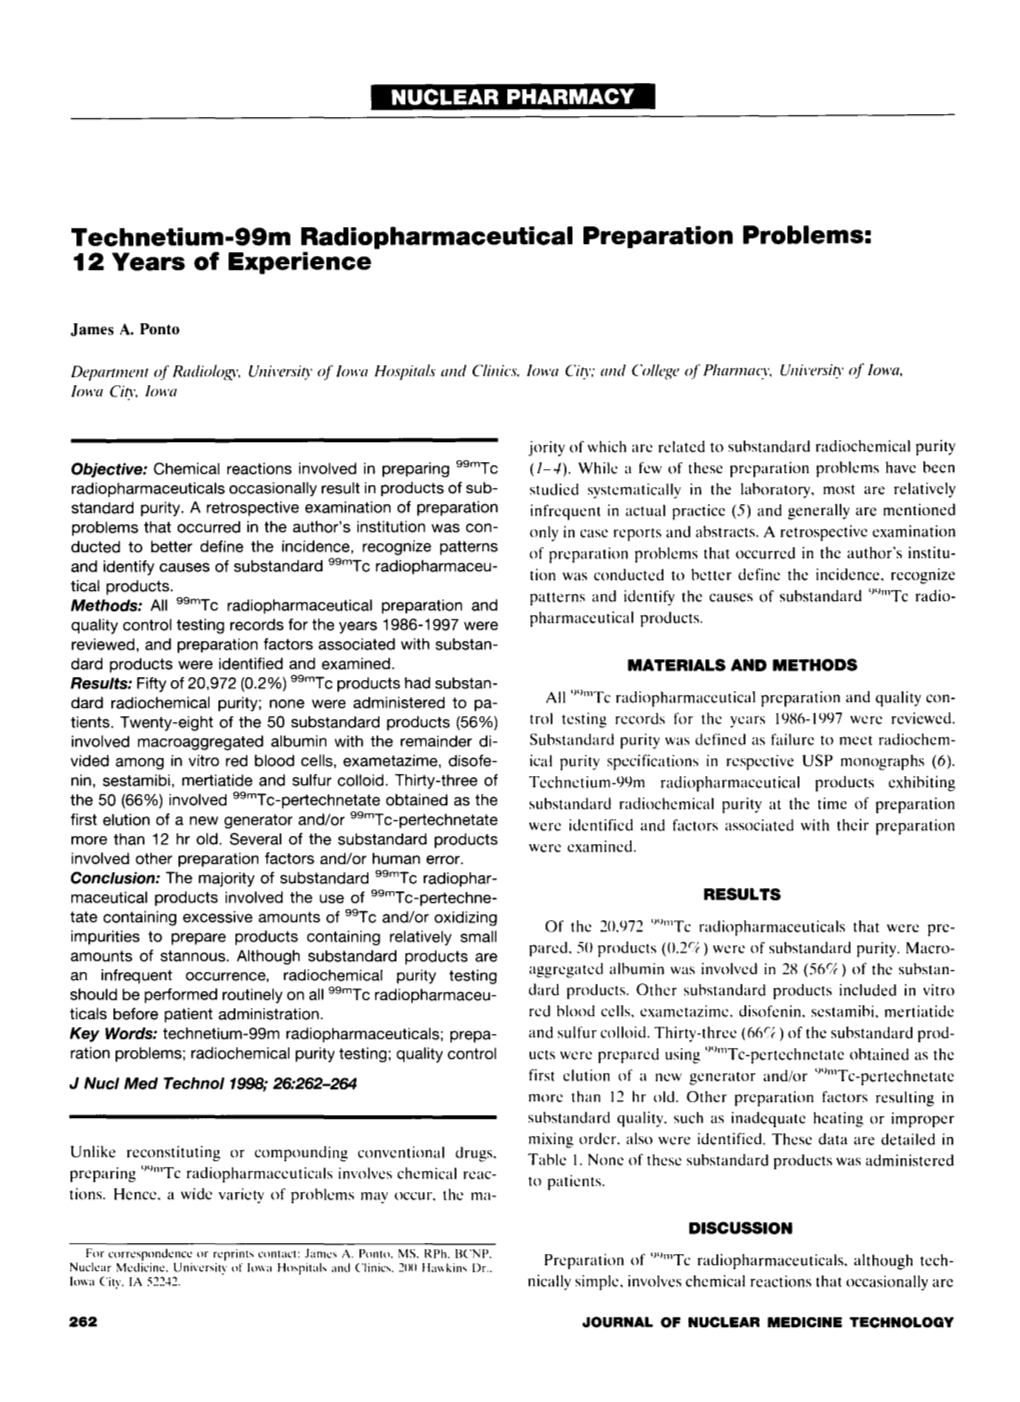 Technetium-99M Radiopharmaceutical Preparation Problems: 12 Years of Experience